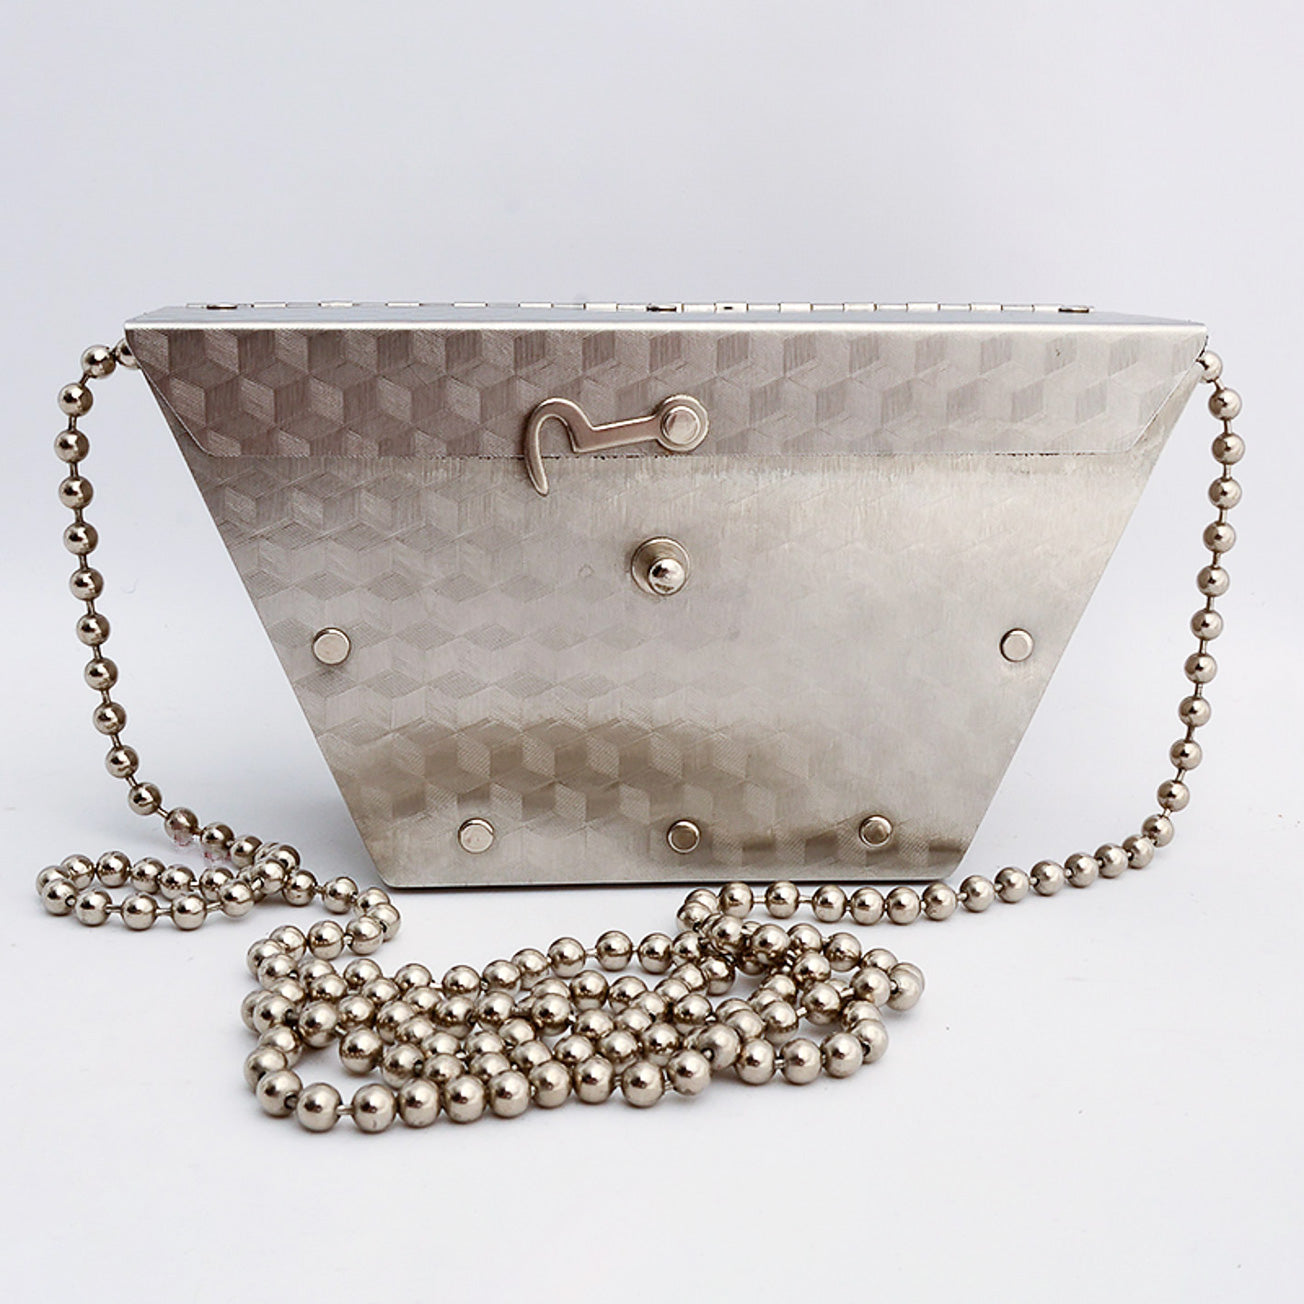 Stainless steel purse by Wendy Stevens with a strap made of steel balls and a hook latch.